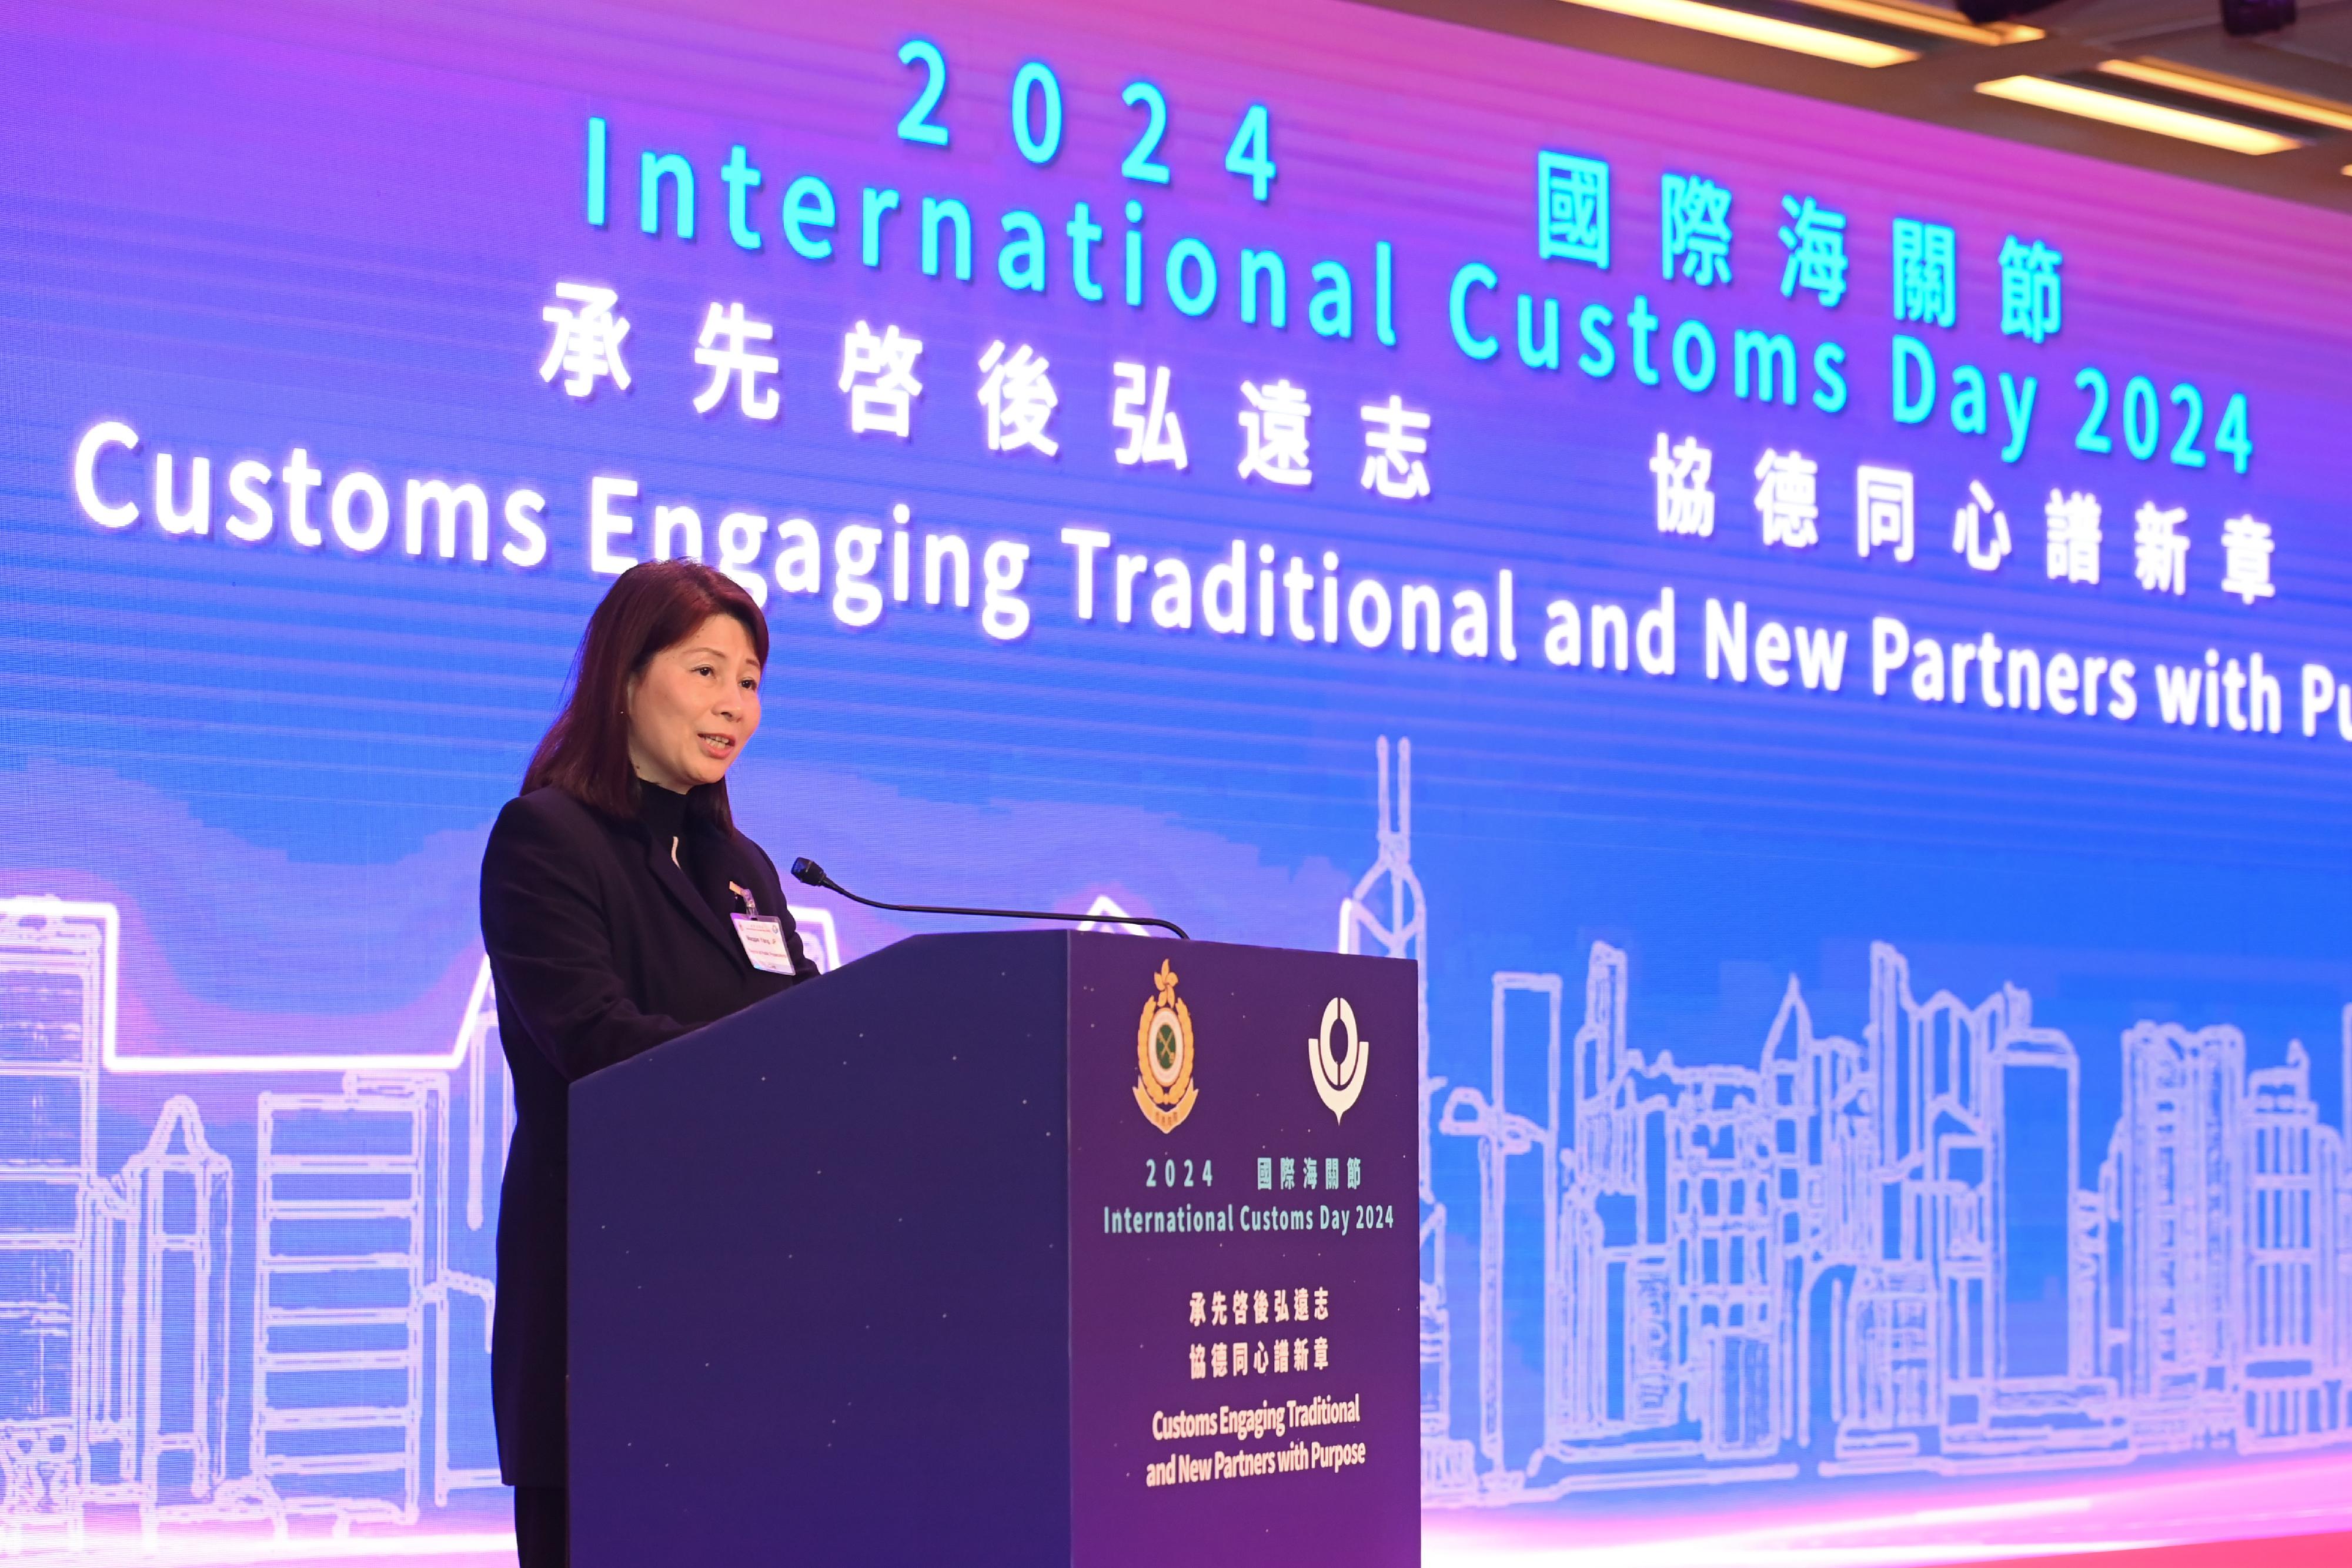 Officiated by the Director of Public Prosecutions, Ms Maggie Yang, and the Commissioner of Customs and Excise, Ms Louise Ho, a reception in celebration of  International Customs Day 2024 was held by Hong Kong Customs at the Hong Kong Convention and Exhibition Centre today (January 25). Photo shows Ms Yang speaking at the celebration reception.